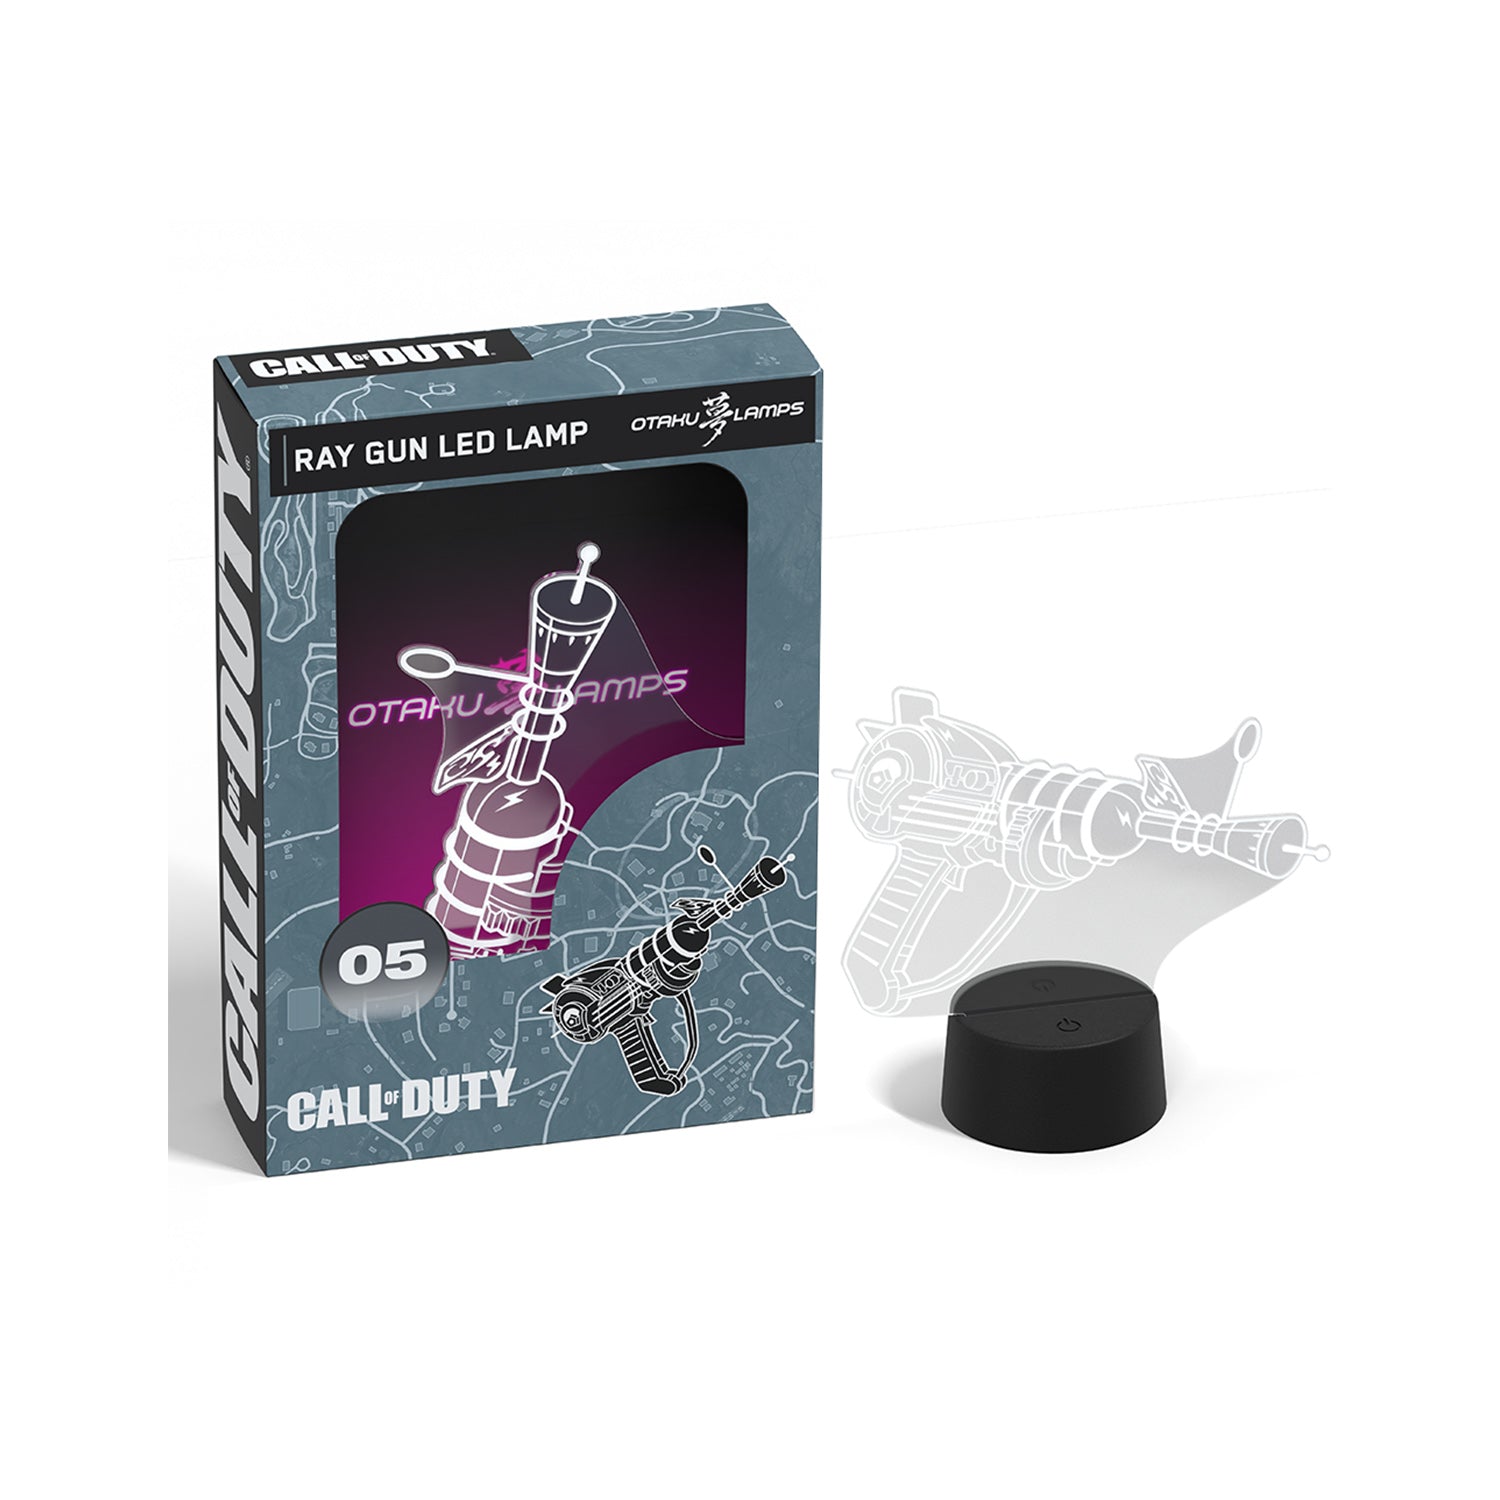 Call of Duty Raygun LED Lamp - Front View and Packaging